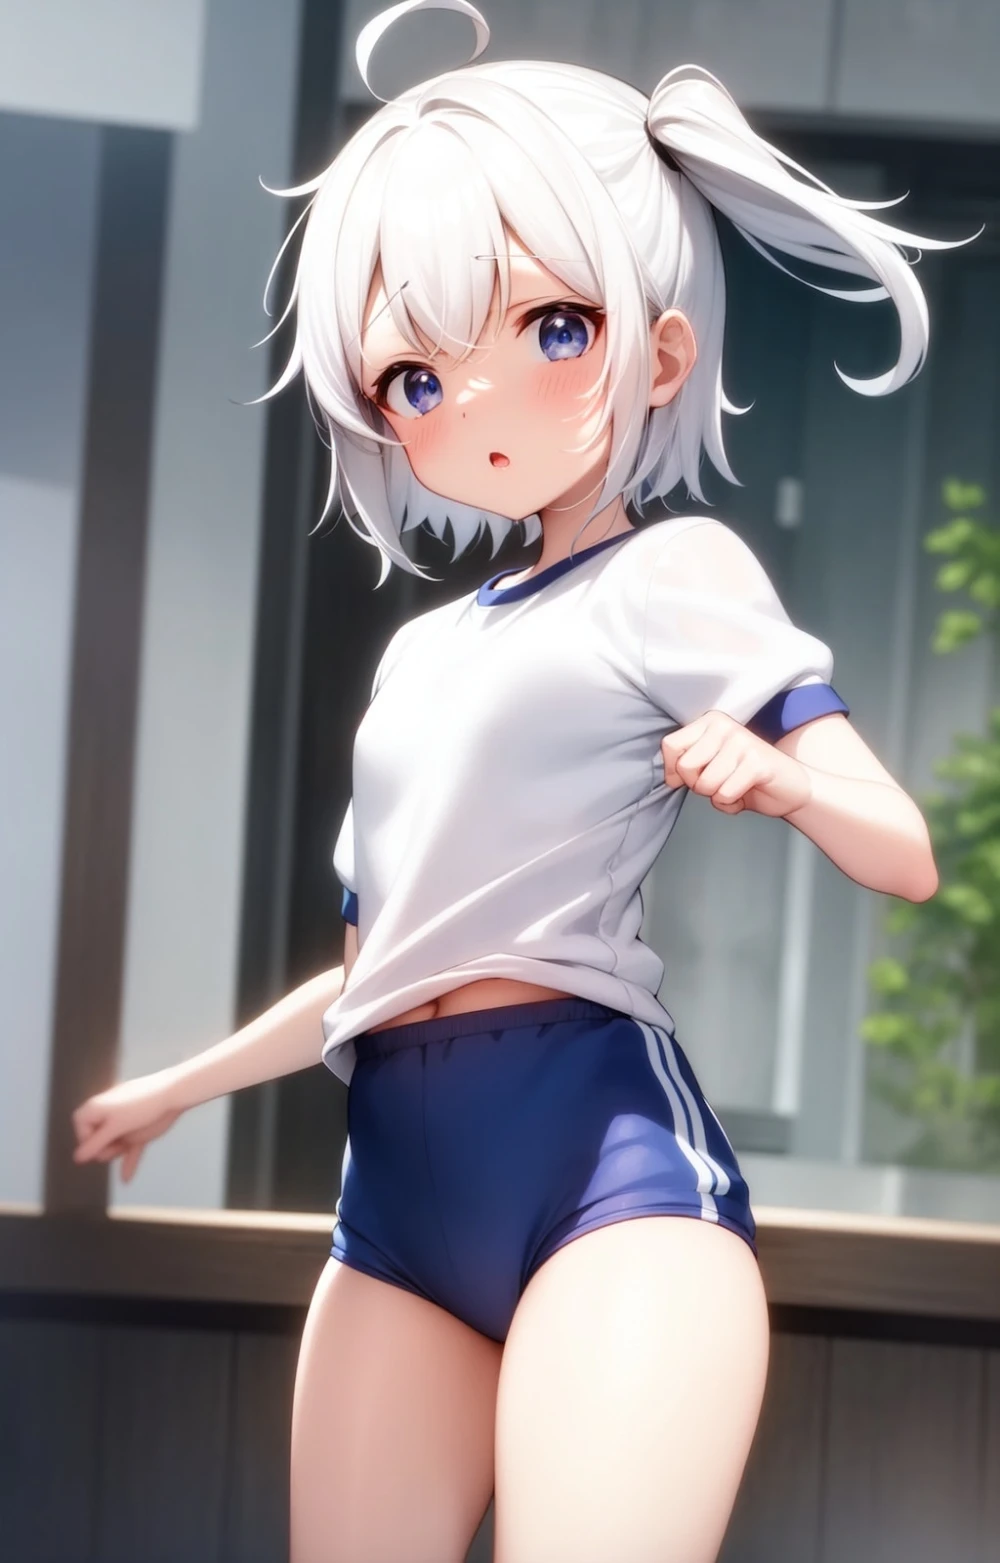 bloomers-anime-style-all-ages-2-50